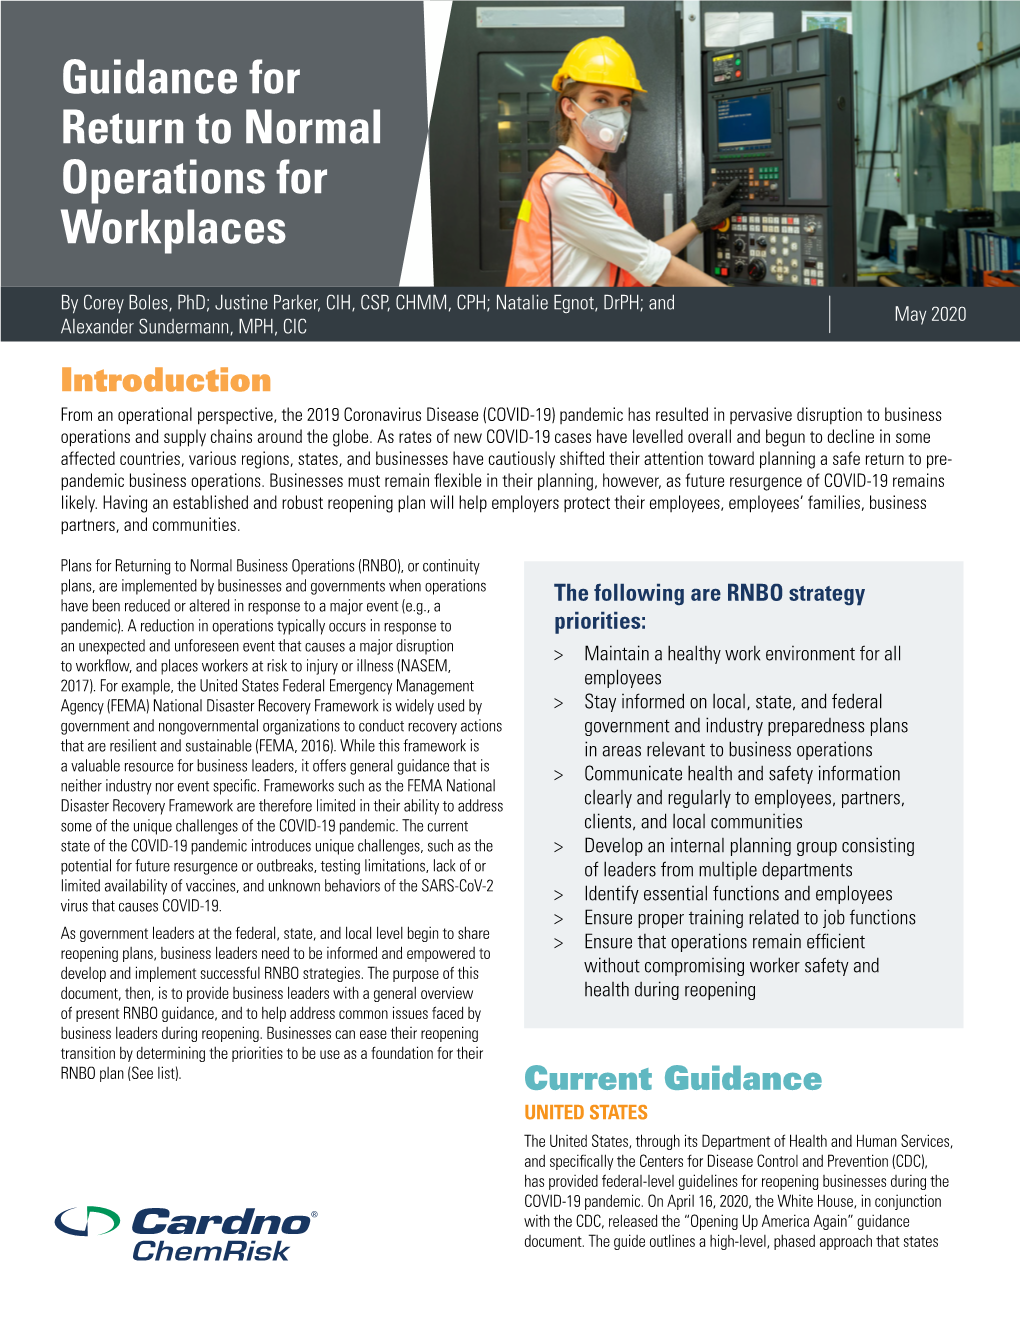 View Our Guidance for Return to Normal Operations for Workplaces